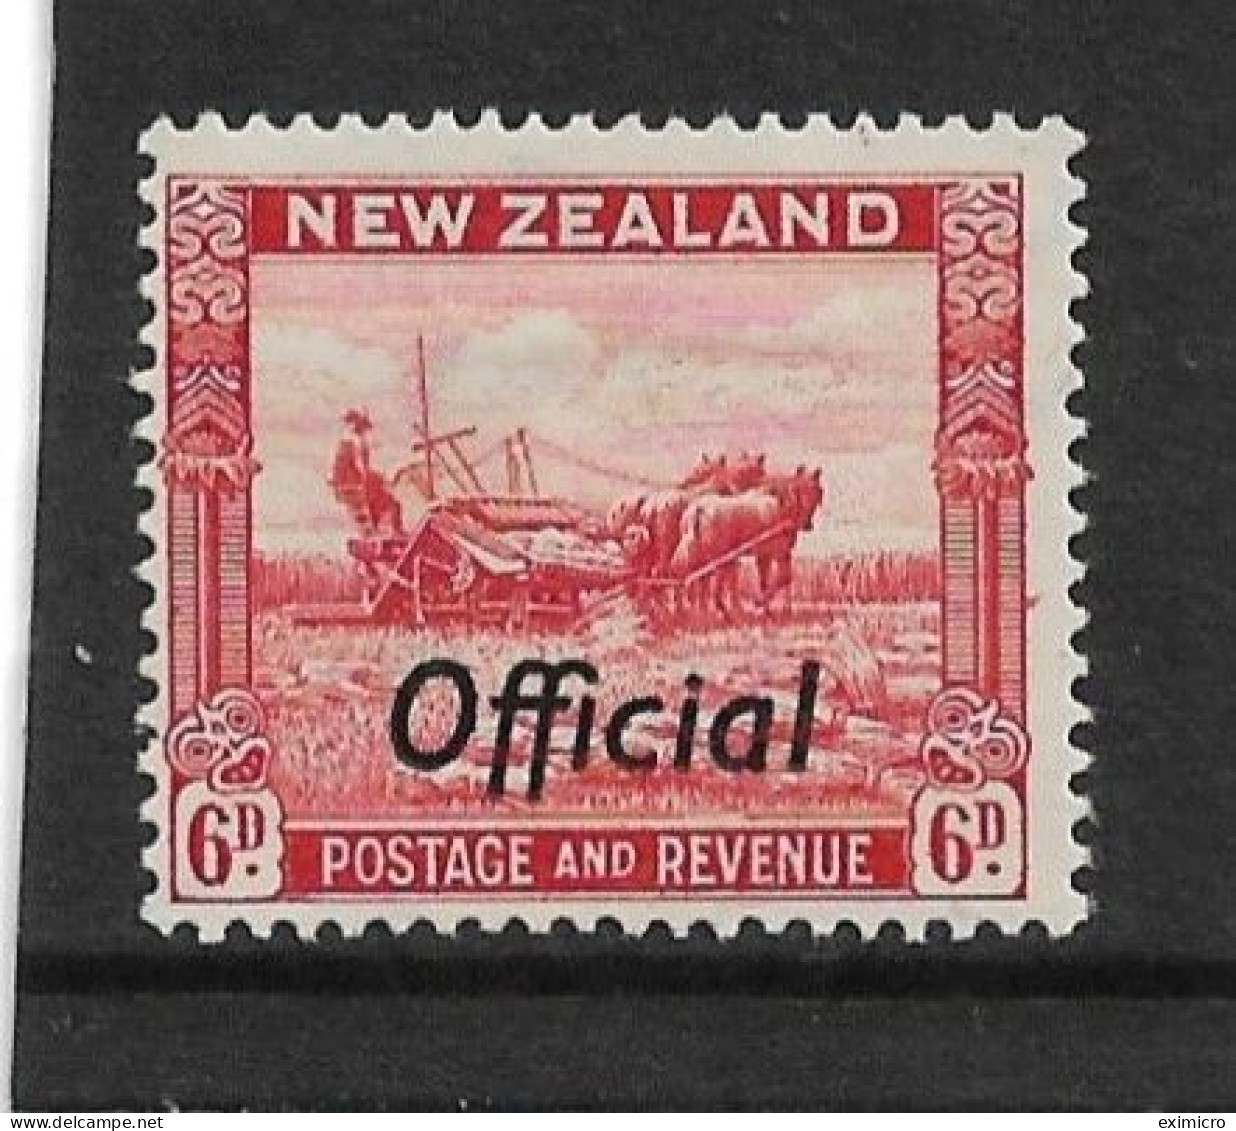 NEW ZEALAND 1942 6d OFFICIAL SG O127c PERF 14½ X 14 LIGHTLY MOUNTED MINT Cat £17 - Service